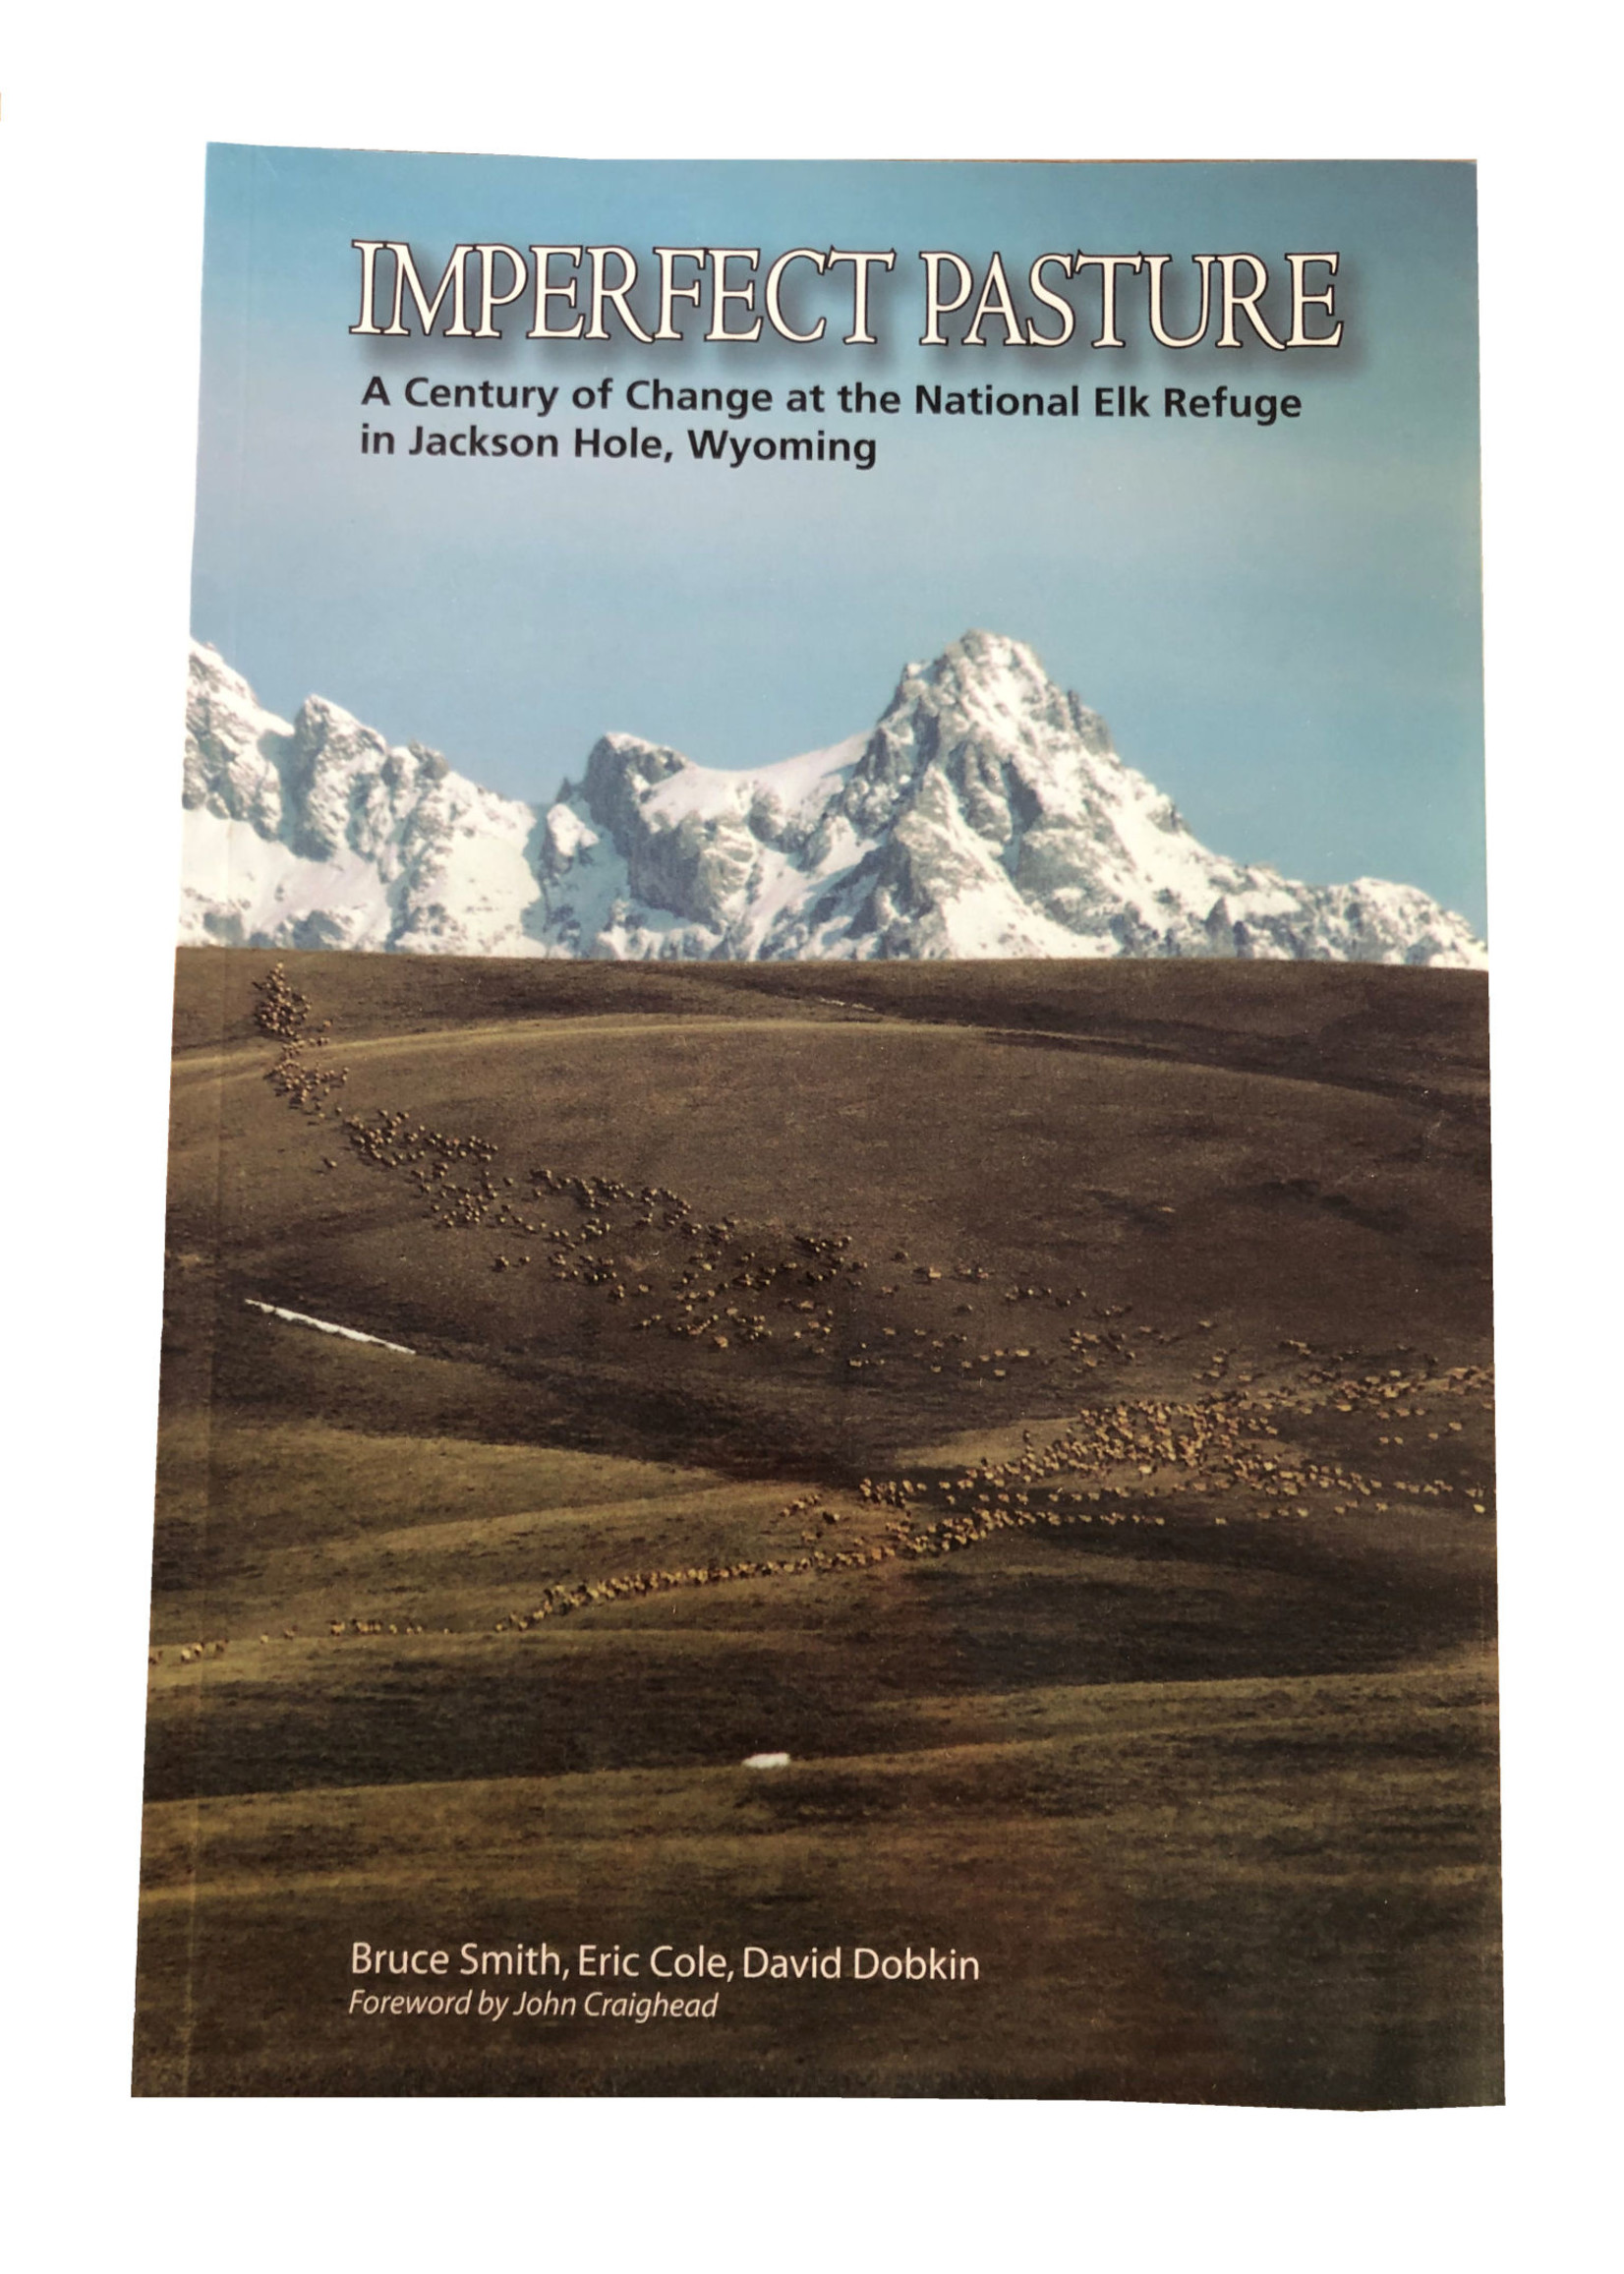 Imperfect Pasture A Century of Change at the National Elk Refuge in Jackson Hole